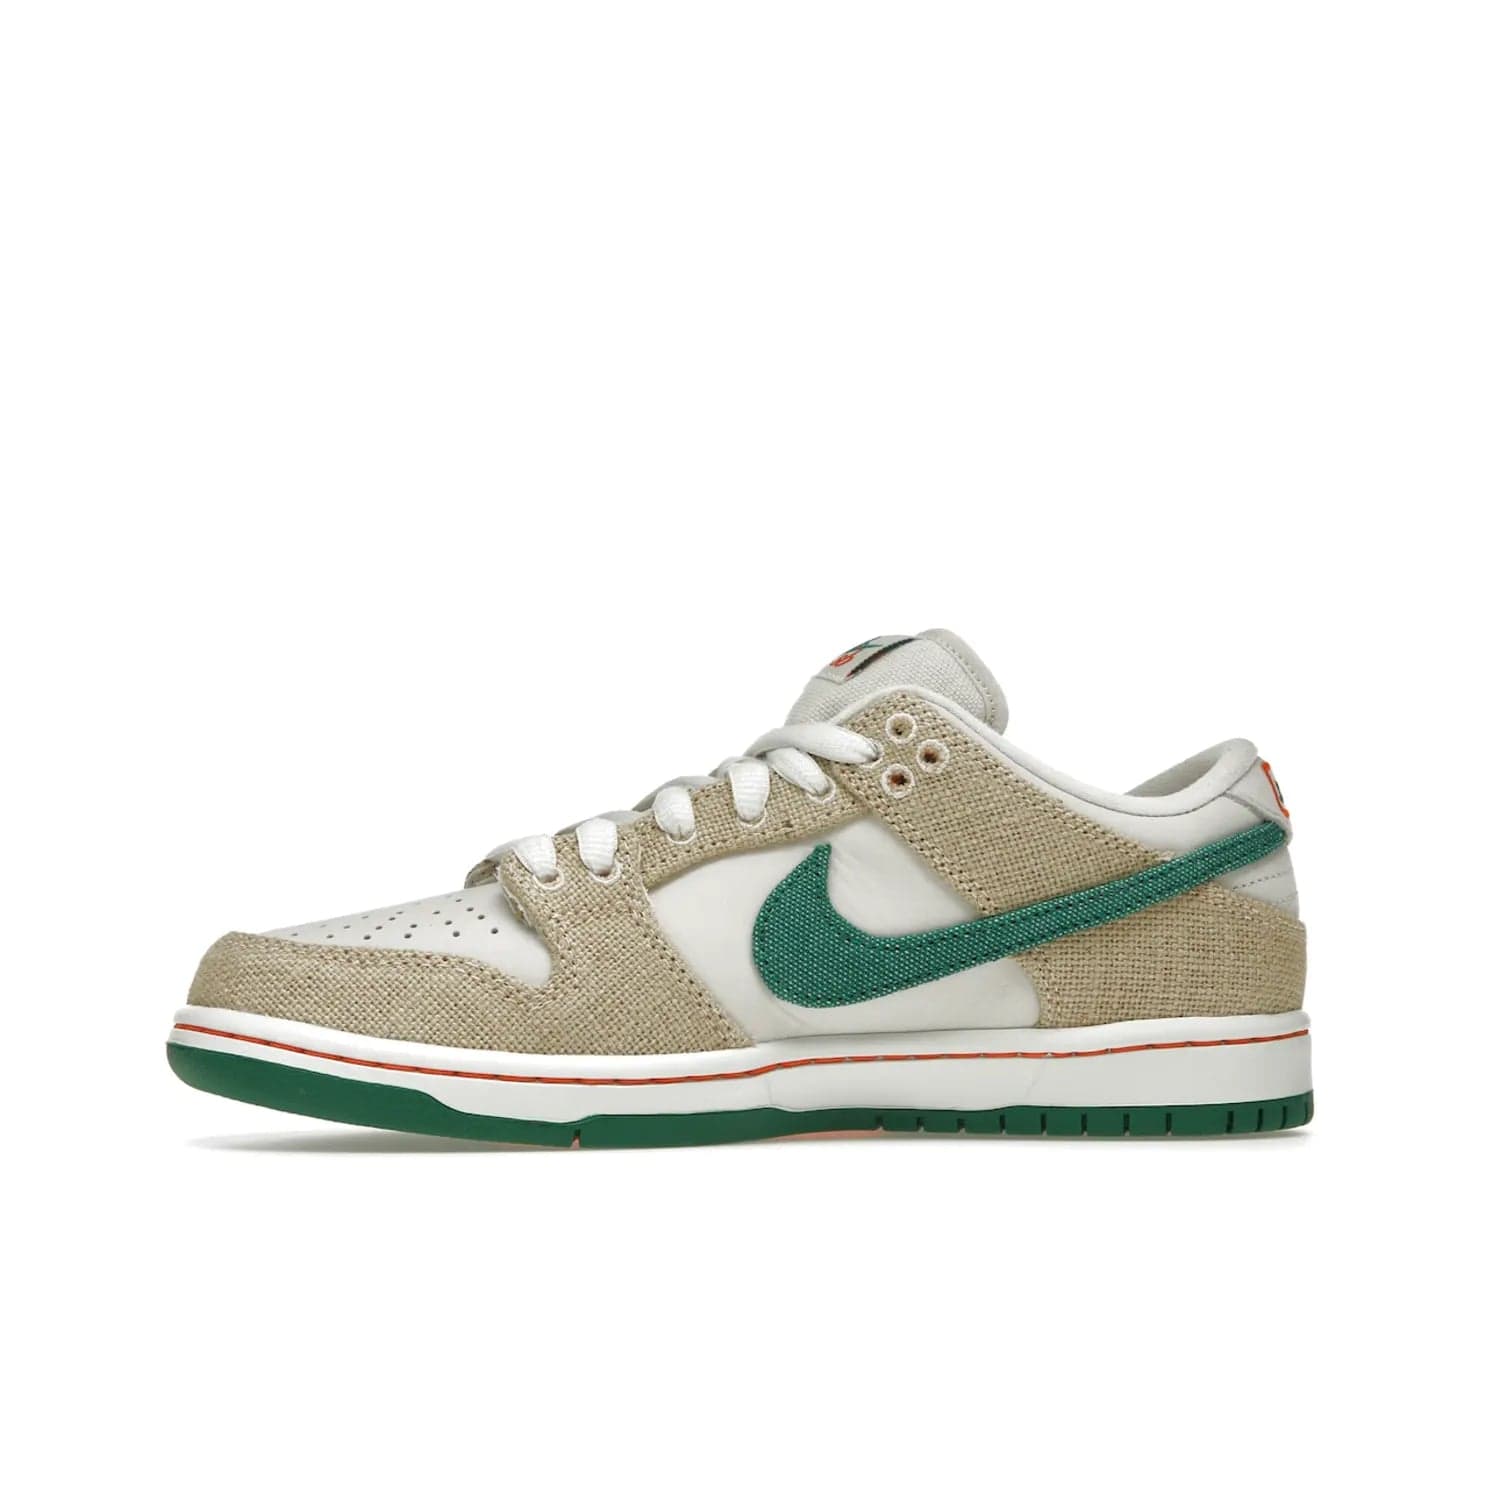 Nike SB Dunk Low Jarritos - Image 18 - Only at www.BallersClubKickz.com - Shop limited edition Nike SB Dunk Low Jarritos! Crafted with white leather and tear-away canvas materials with green accents. Includes orange, green, and white laces to customize your look. Available now.